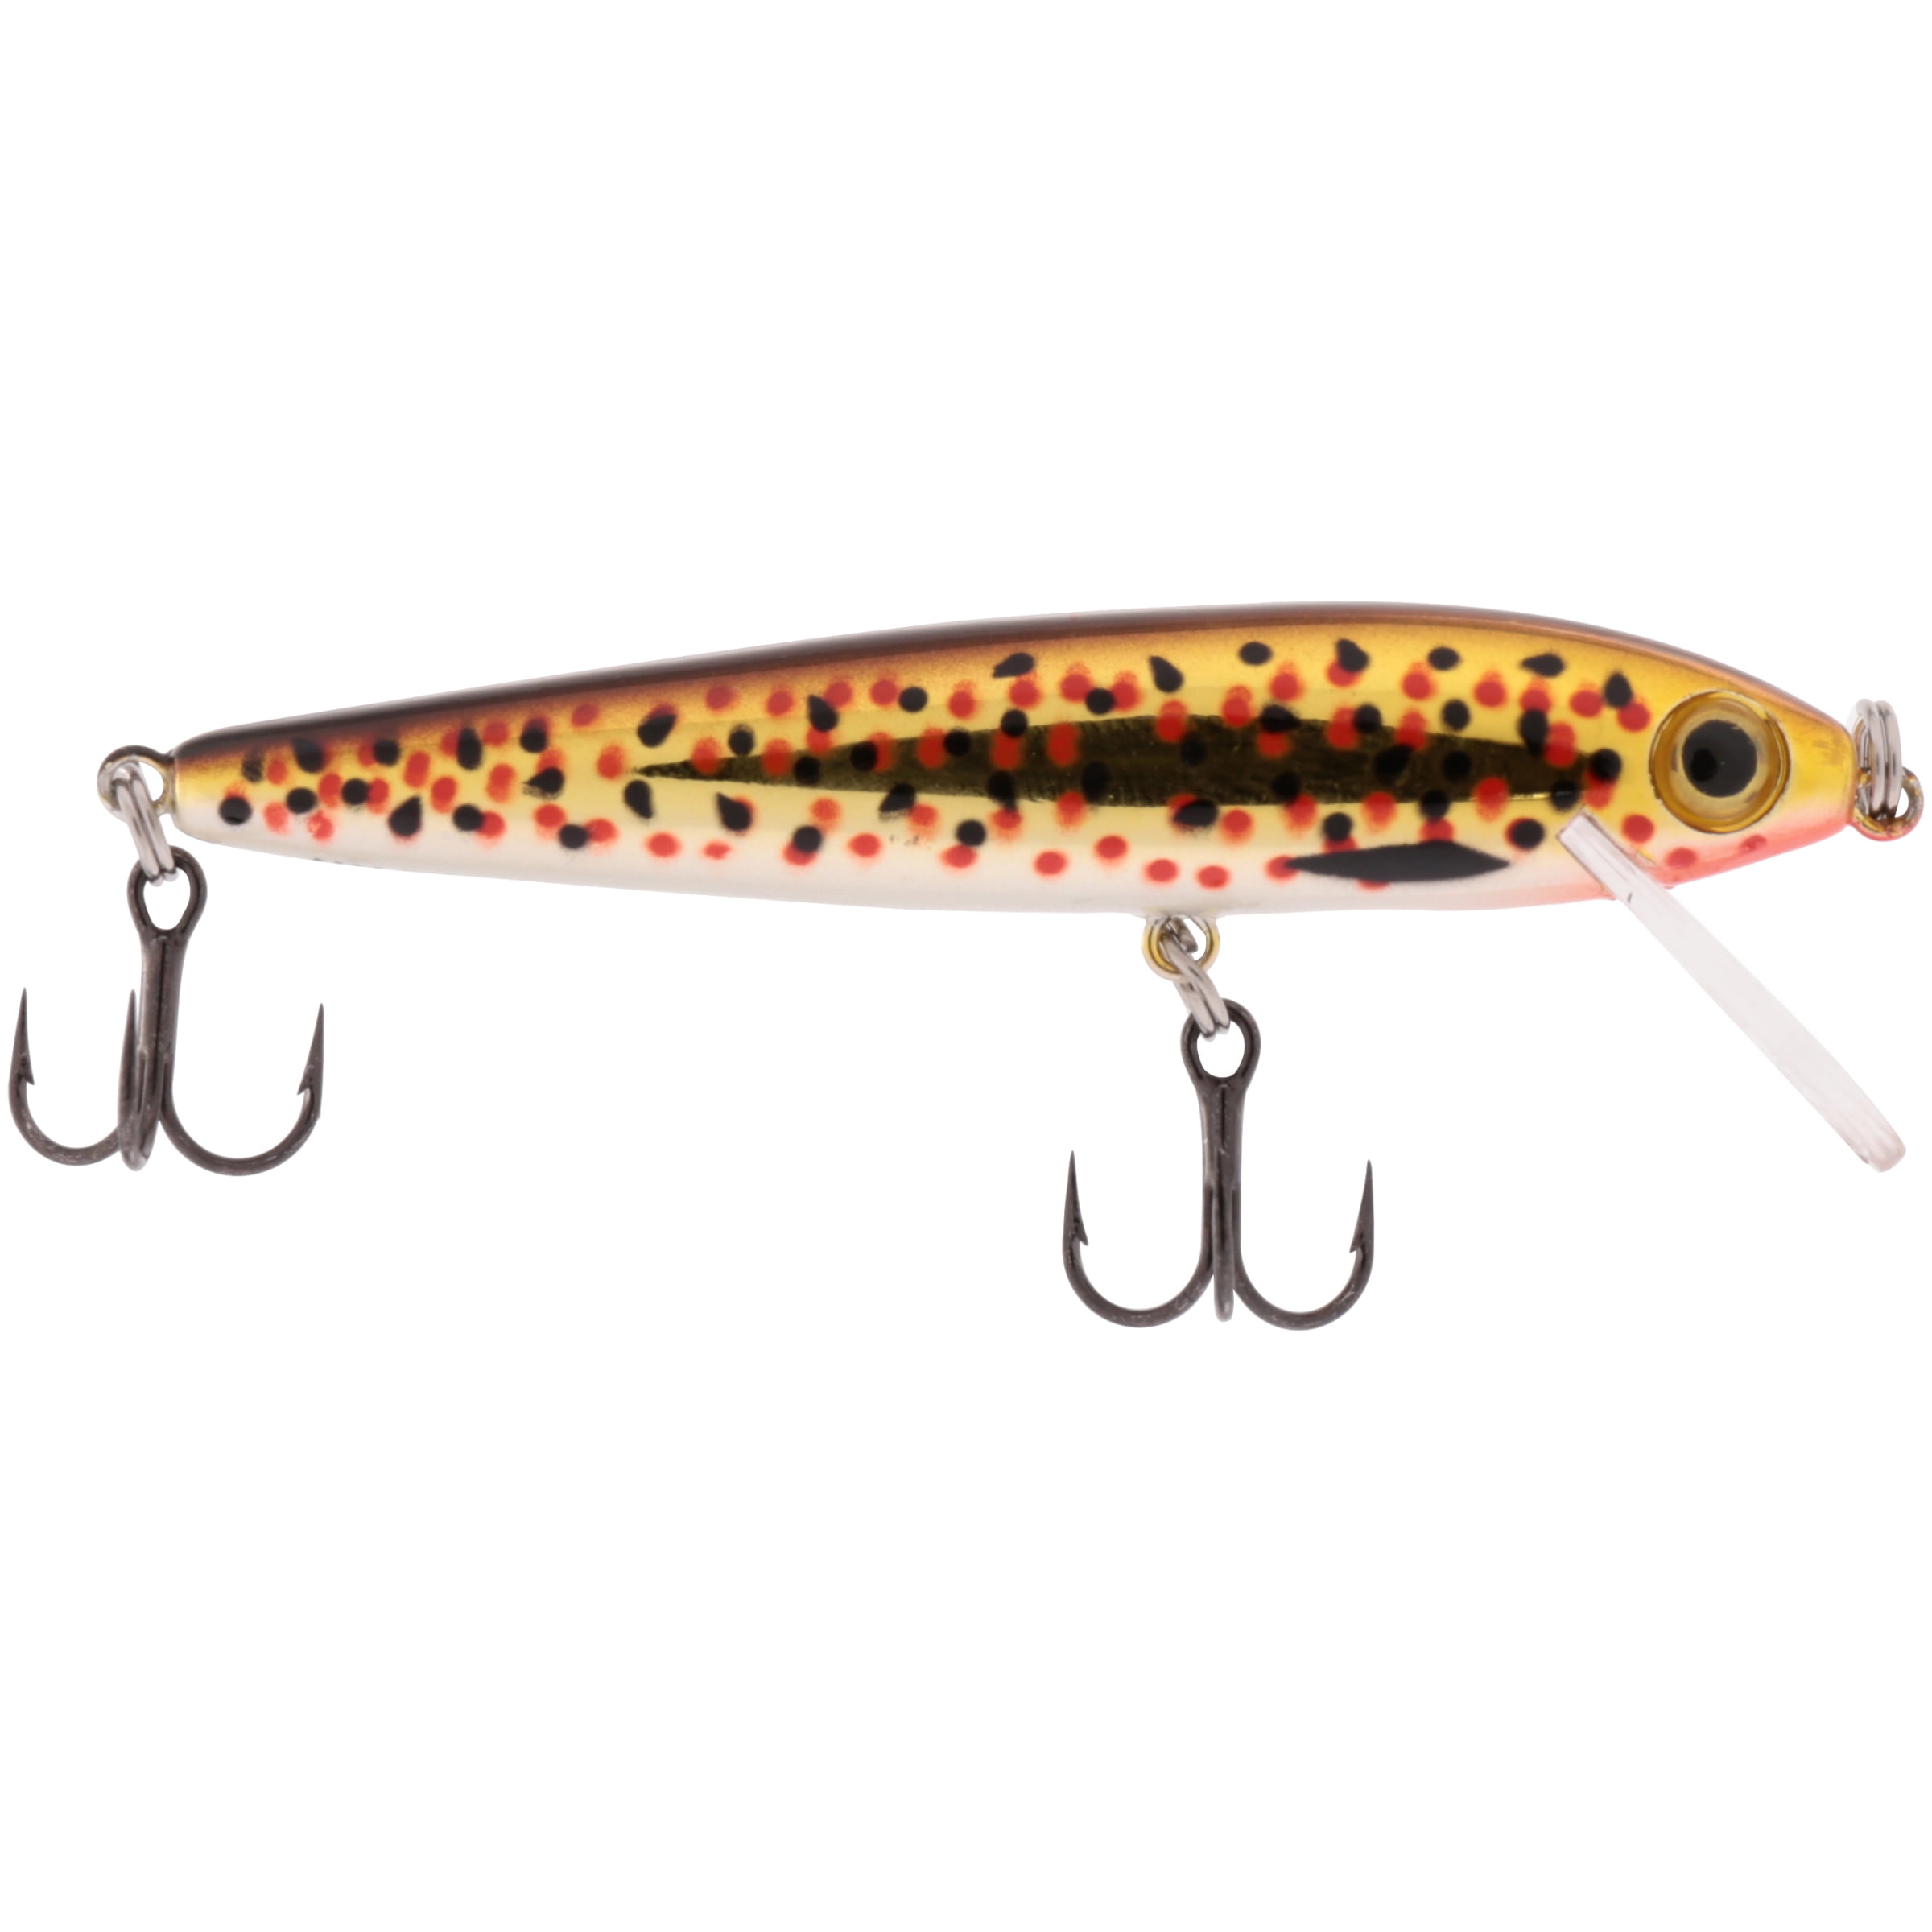 Tracdown Ghost Minnow Slow-Sinking Crankbait Fishing Lure - Great for B,  Trout and Walleye